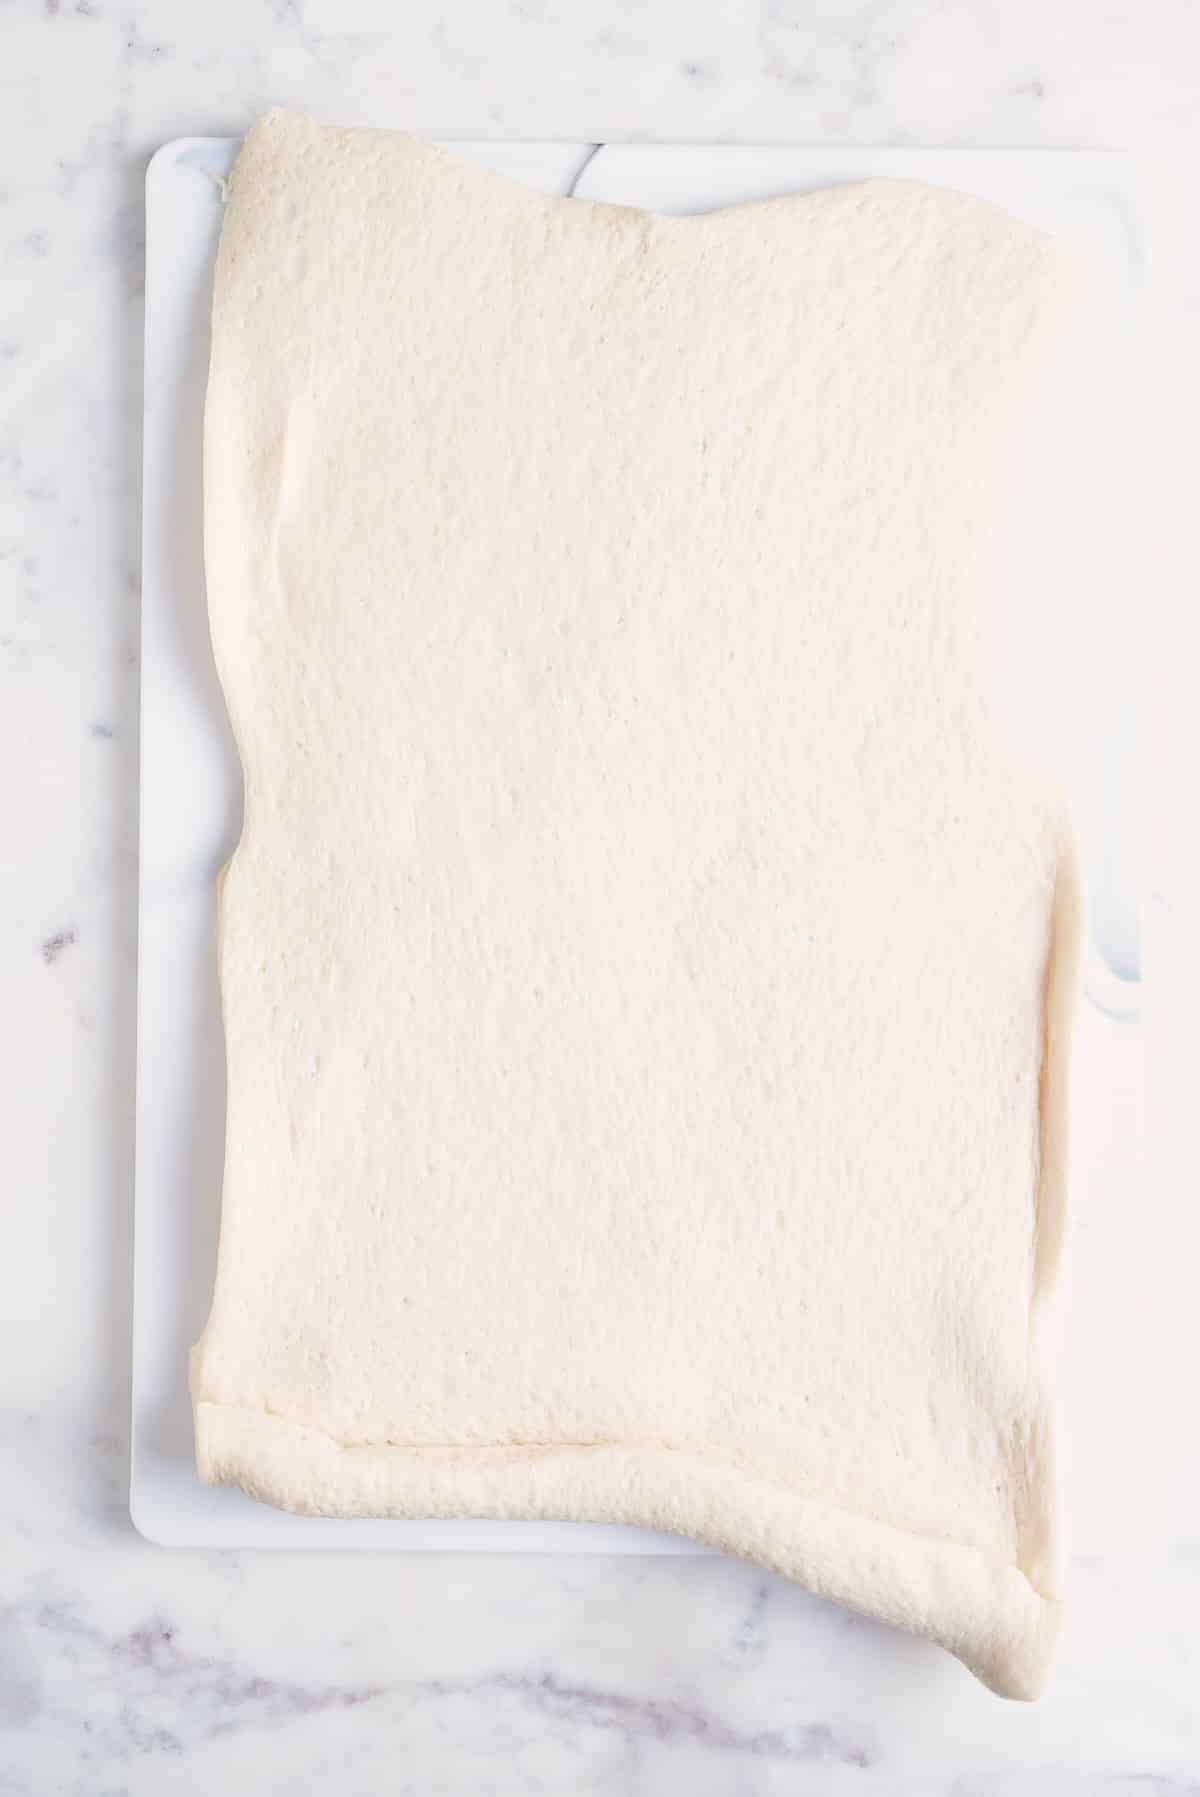 a sheet of pizza dough spread out on a board